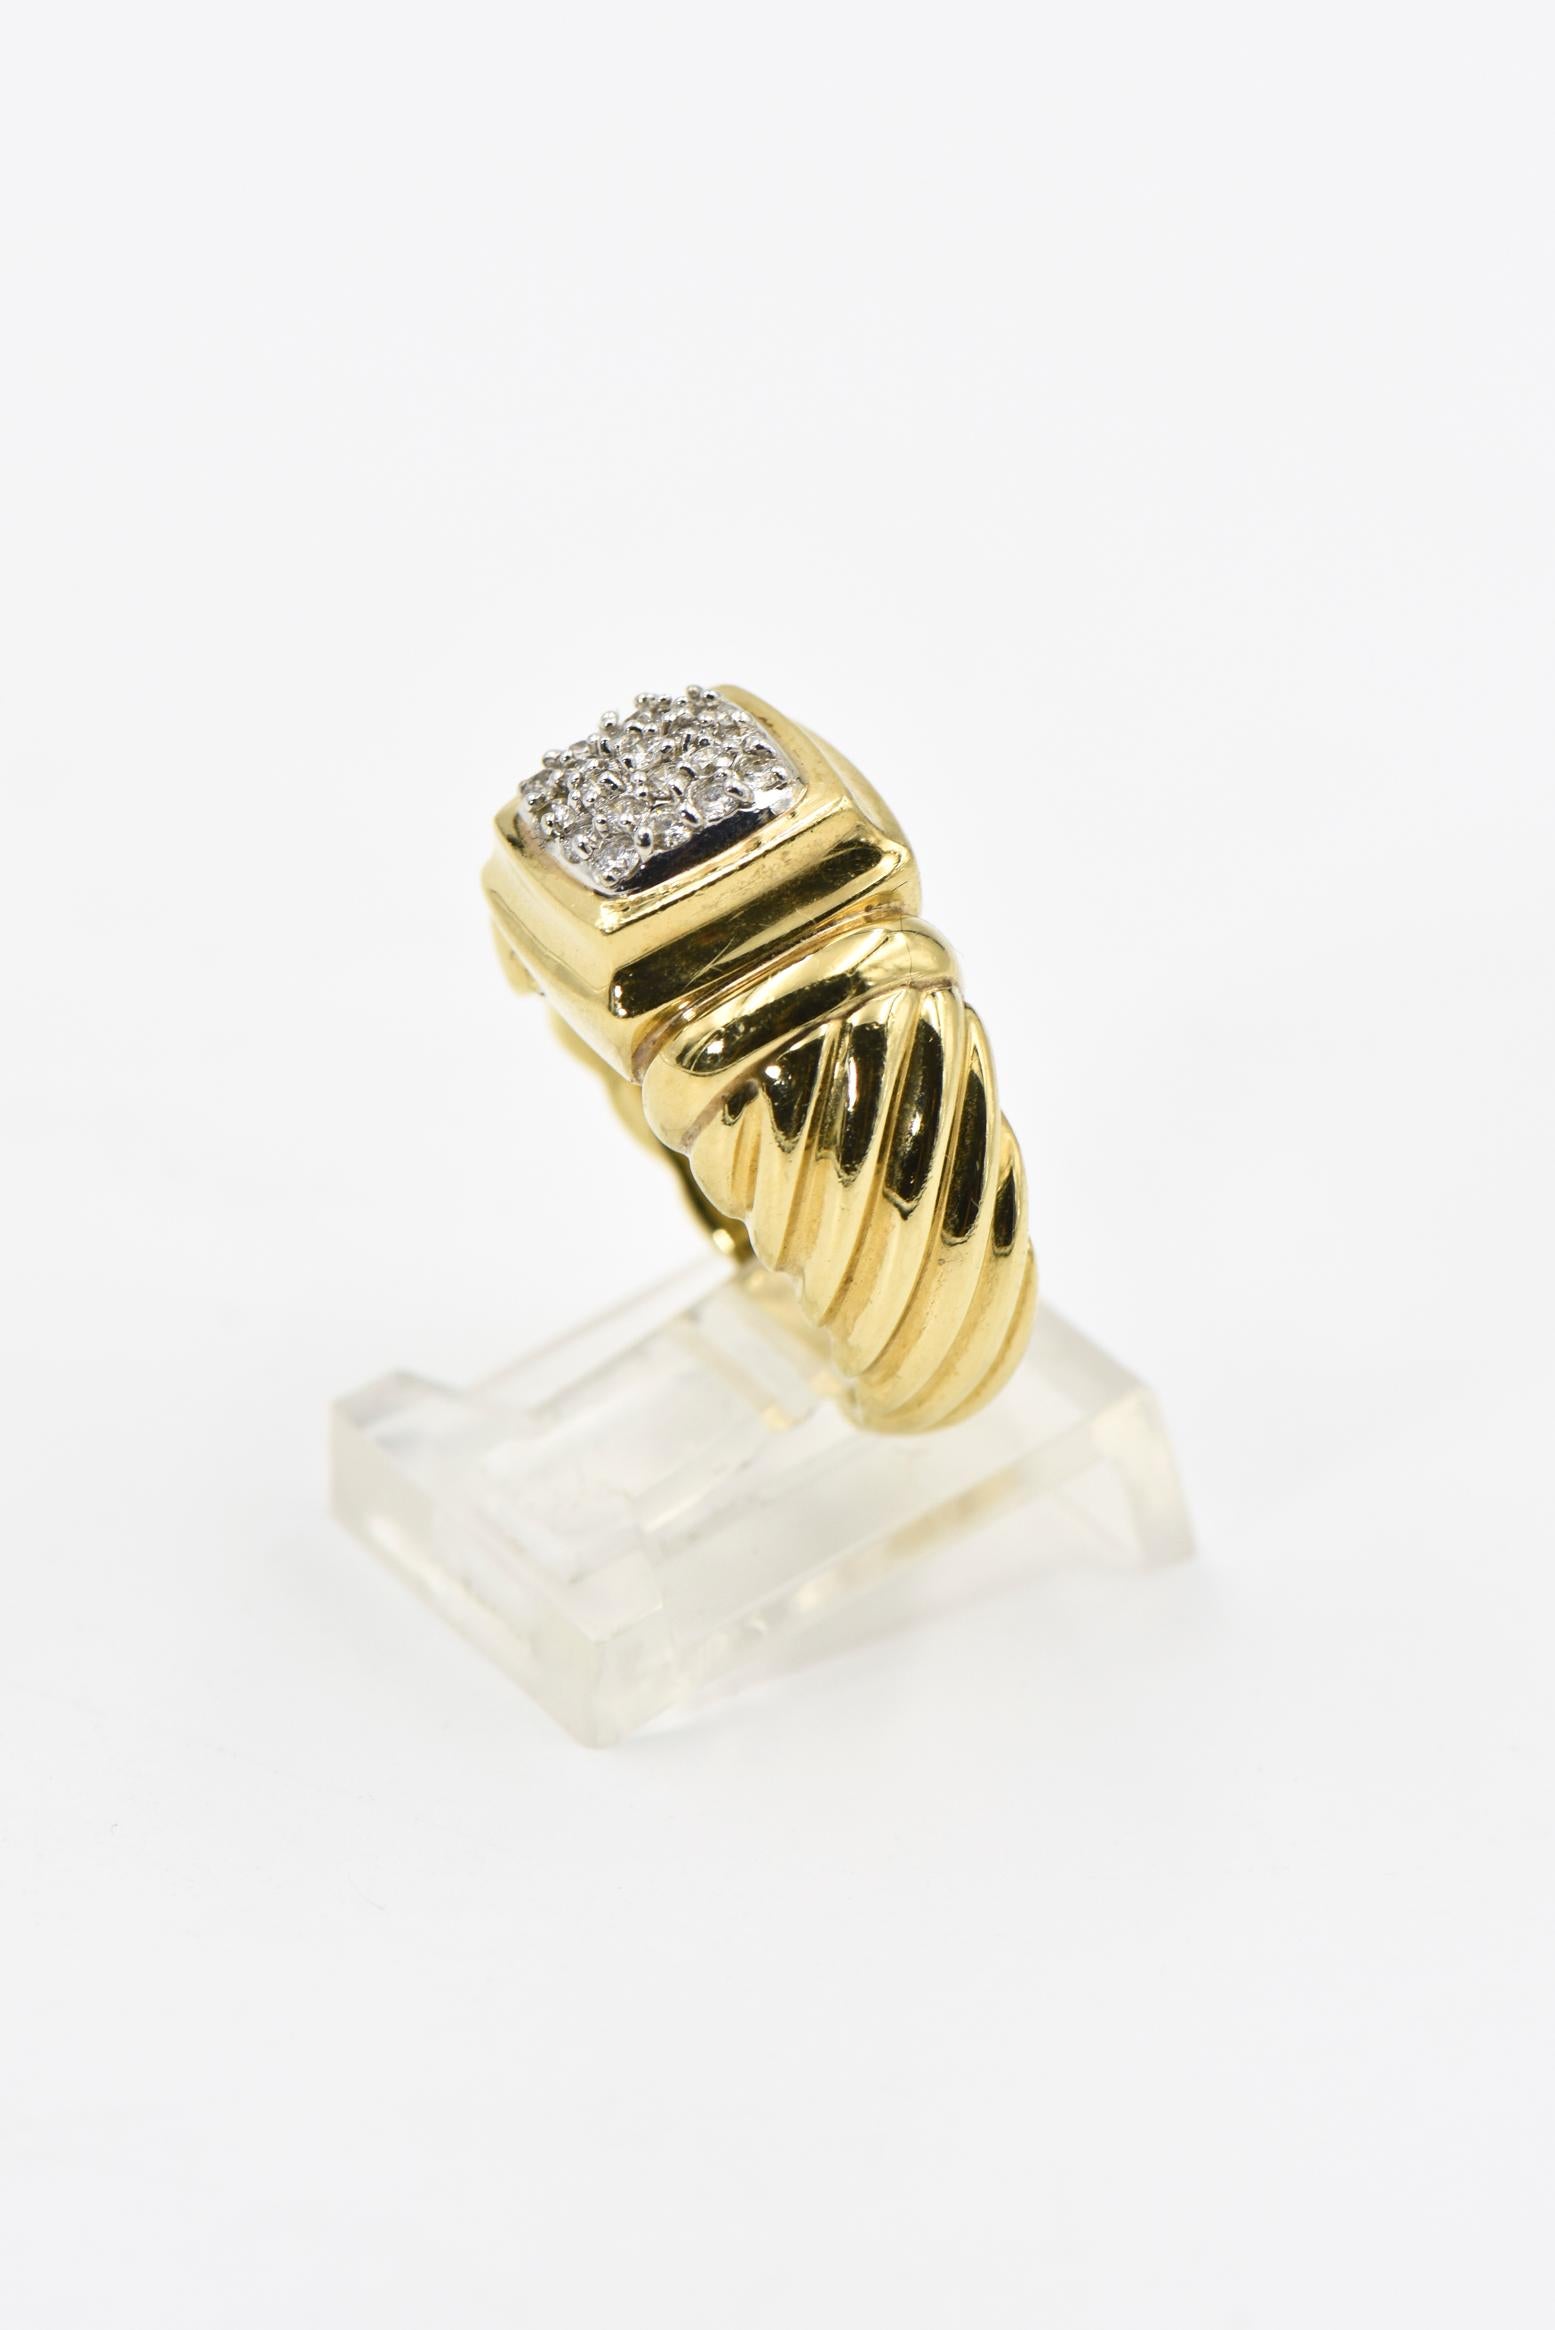 Round Cut Yurman Diamond Gold Cable Band Ring For Sale